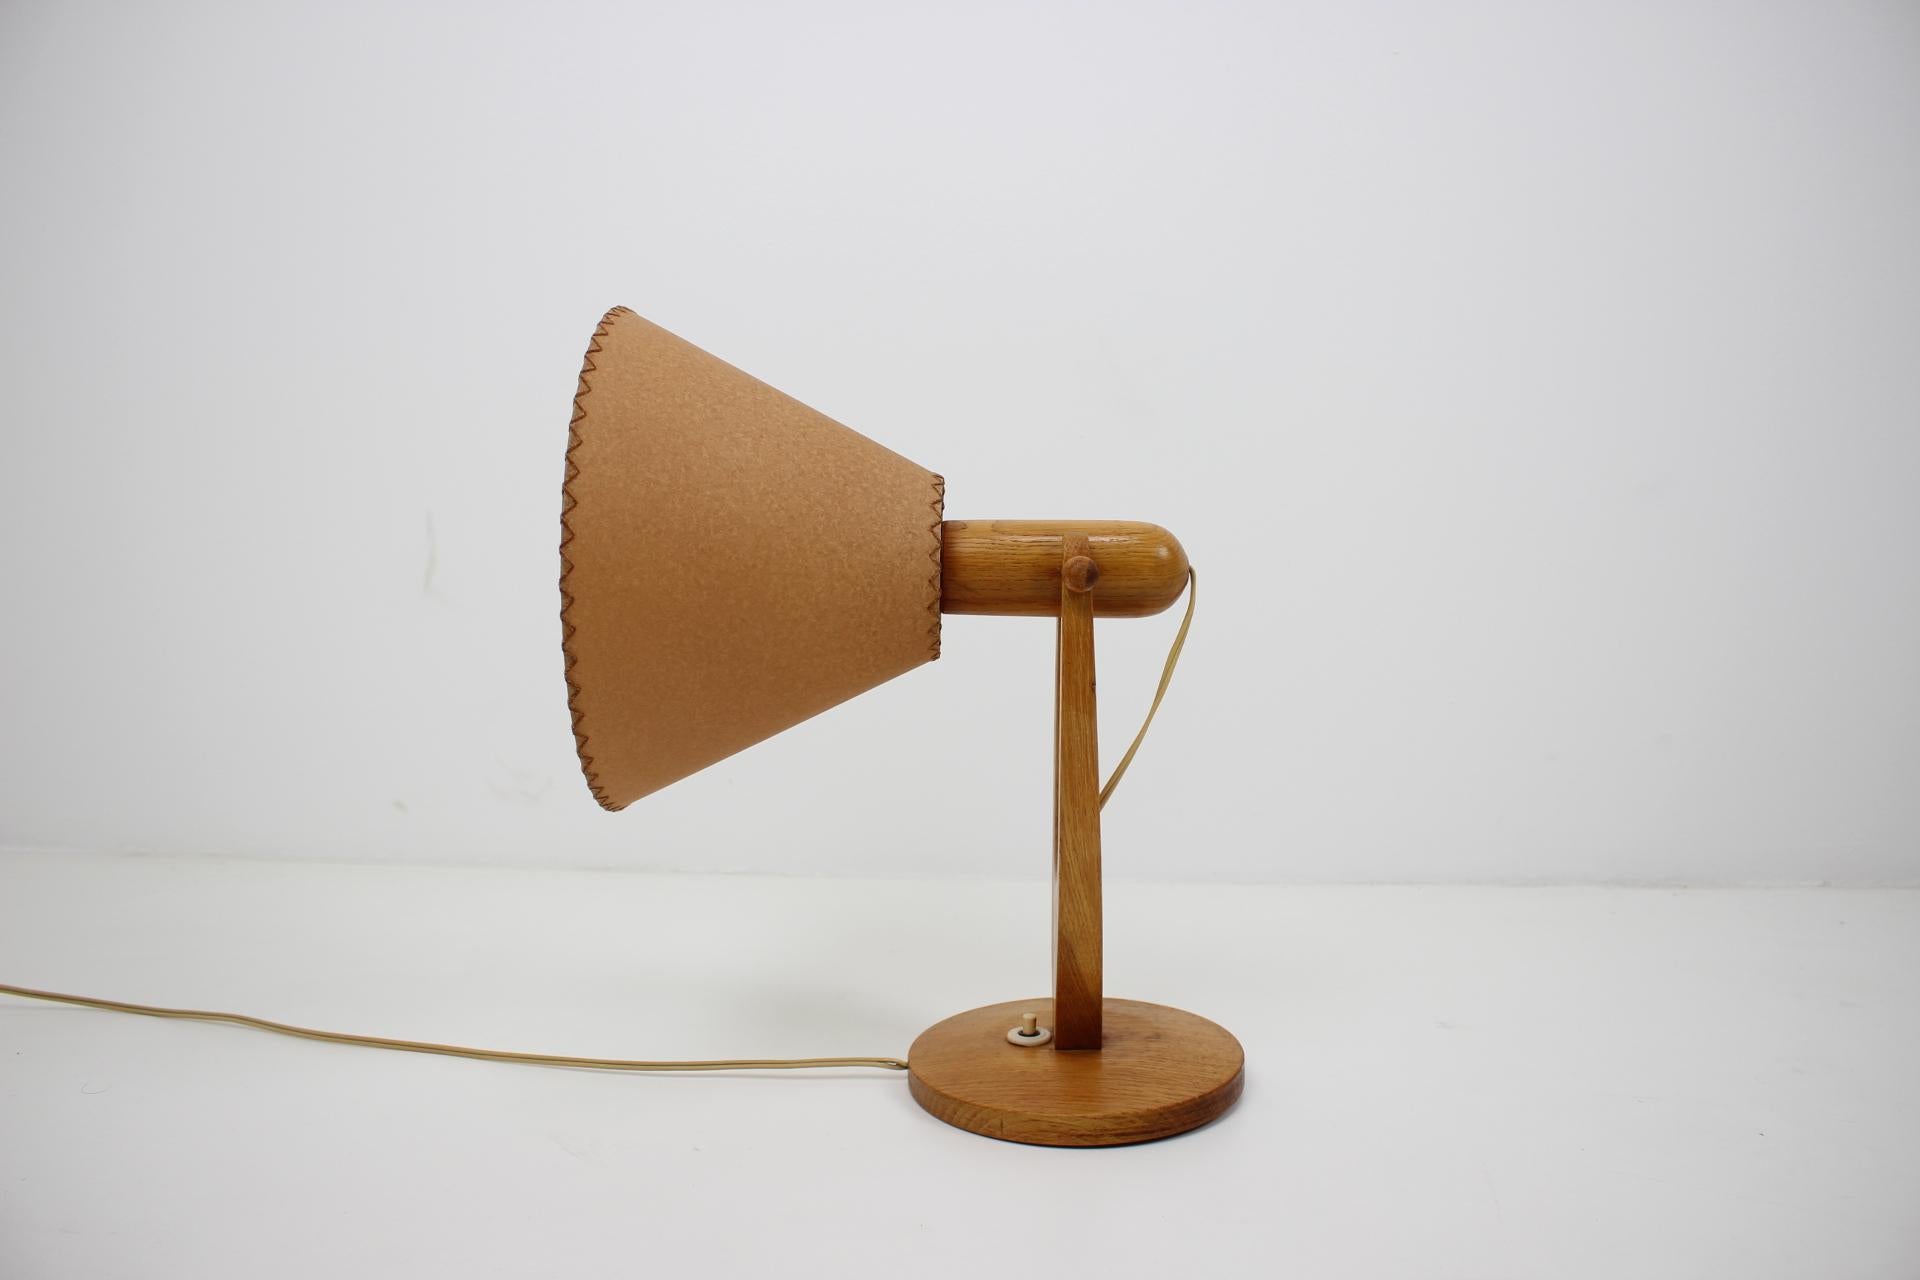 - Made in Czechoslovakia
- Made of wood, pergamen
- New lampshade
- Fully functional
- Very good, original condition.